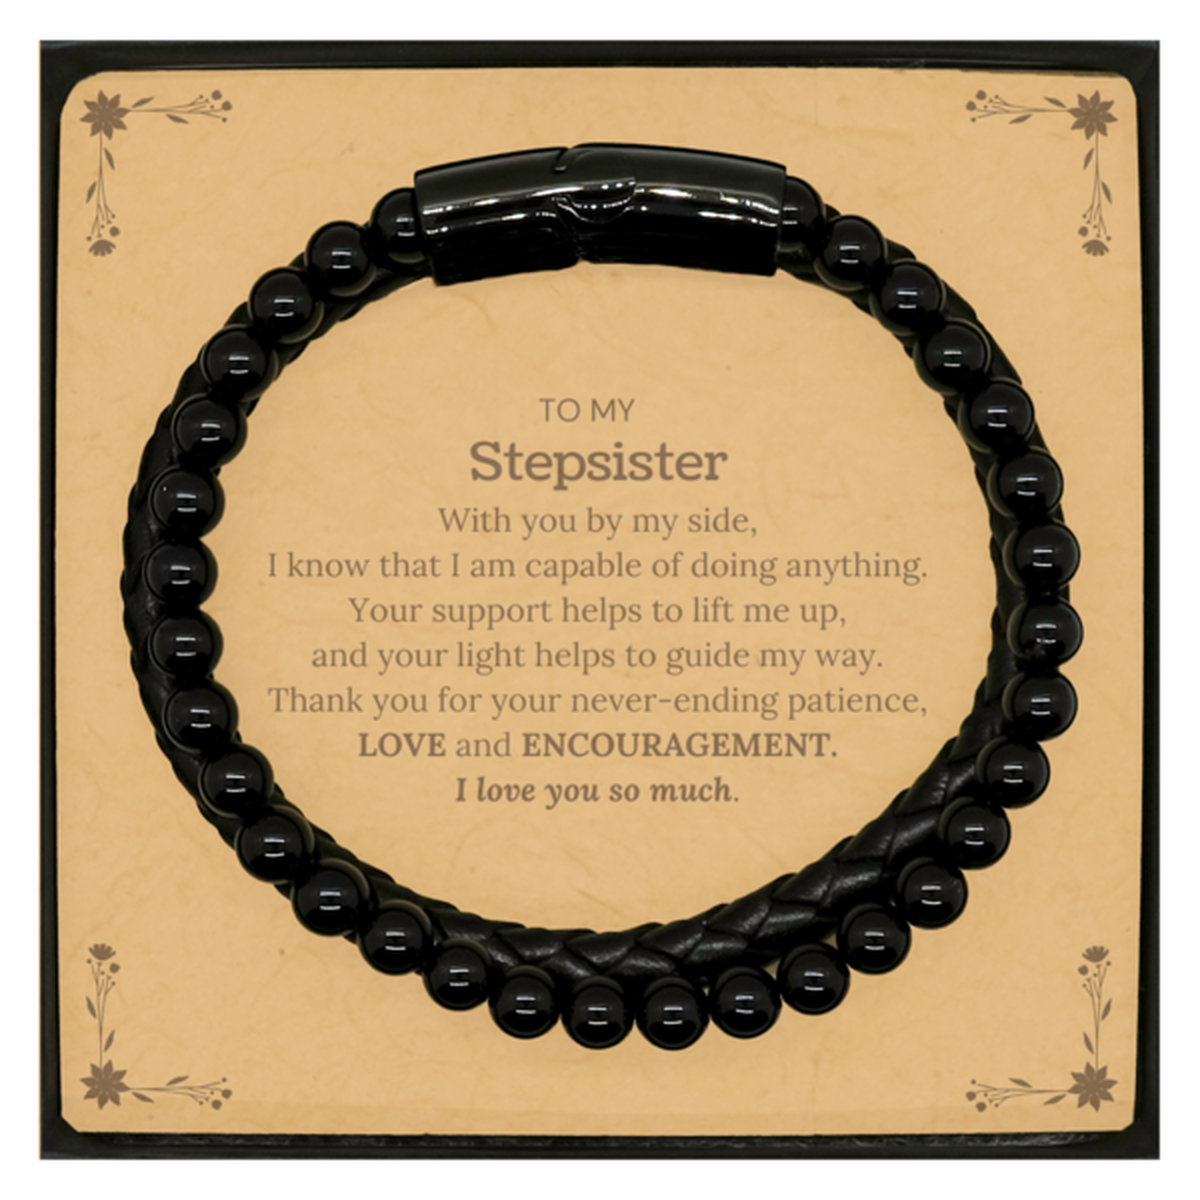 Appreciation Stepsister Stone Leather Bracelets Gifts, To My Stepsister Birthday Christmas Wedding Keepsake Gifts for Stepsister With you by my side, I know that I am capable of doing anything. I love you so much